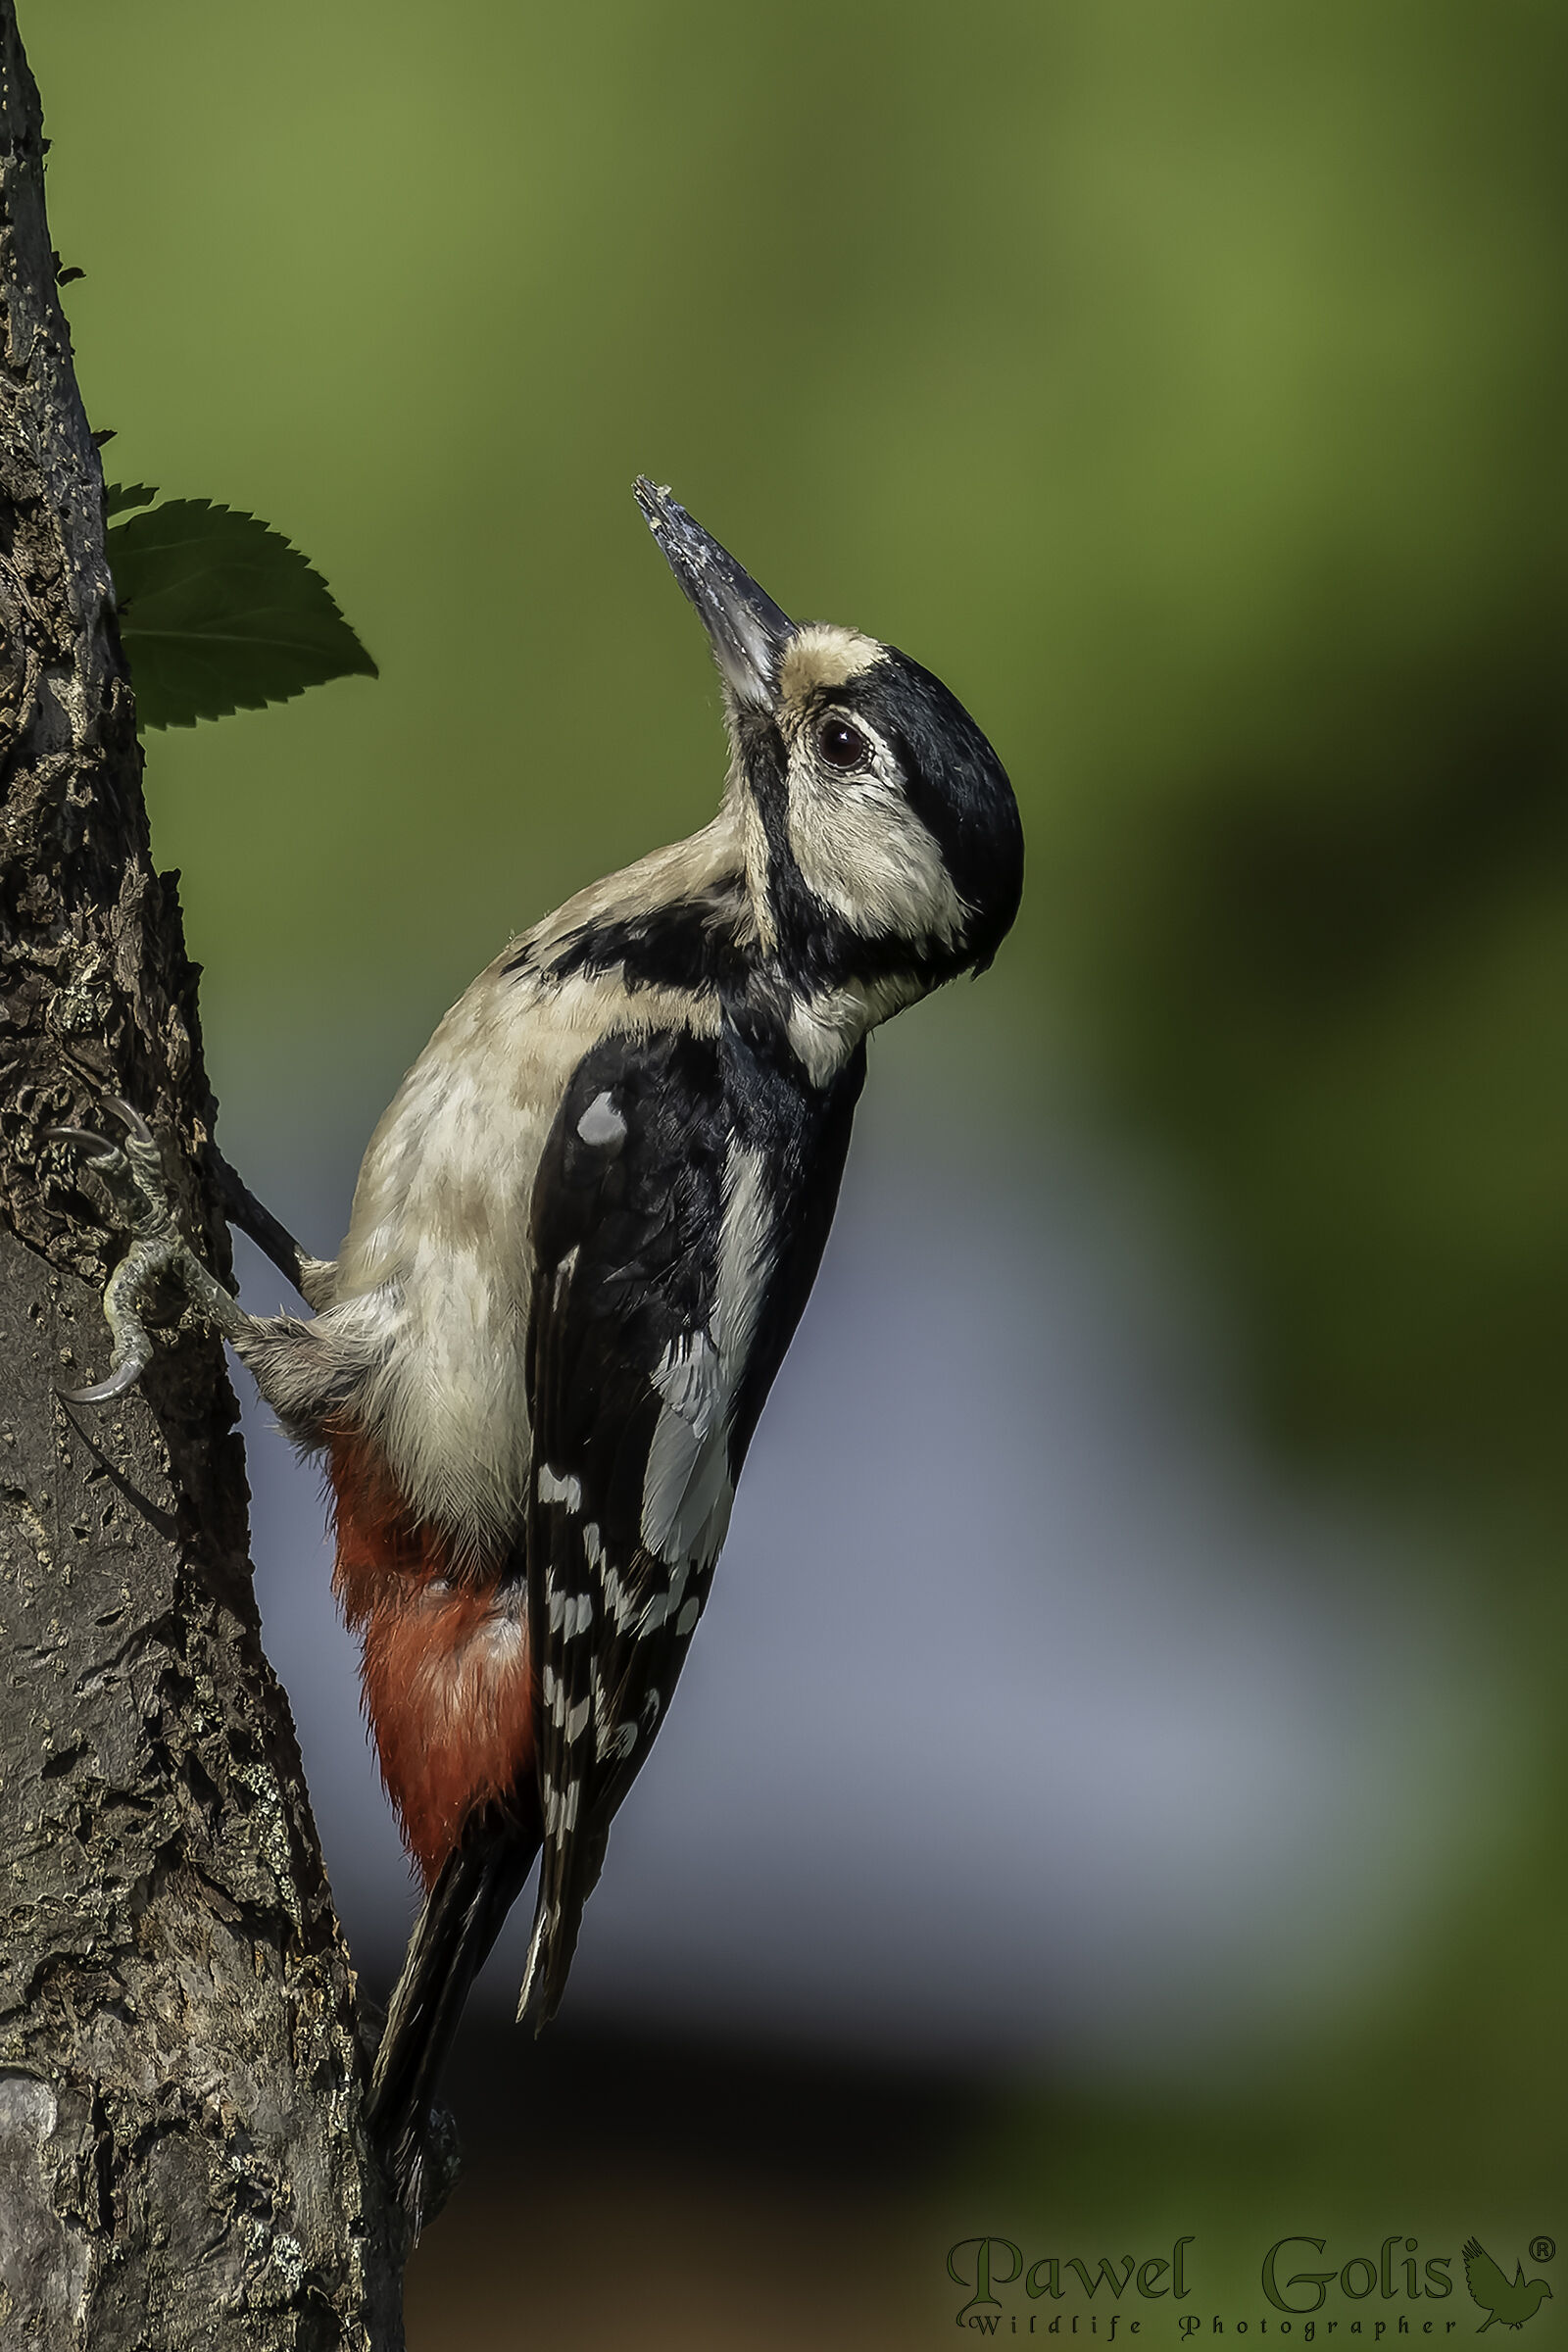 The great spotted woodpecker (Dendrocopos major)...